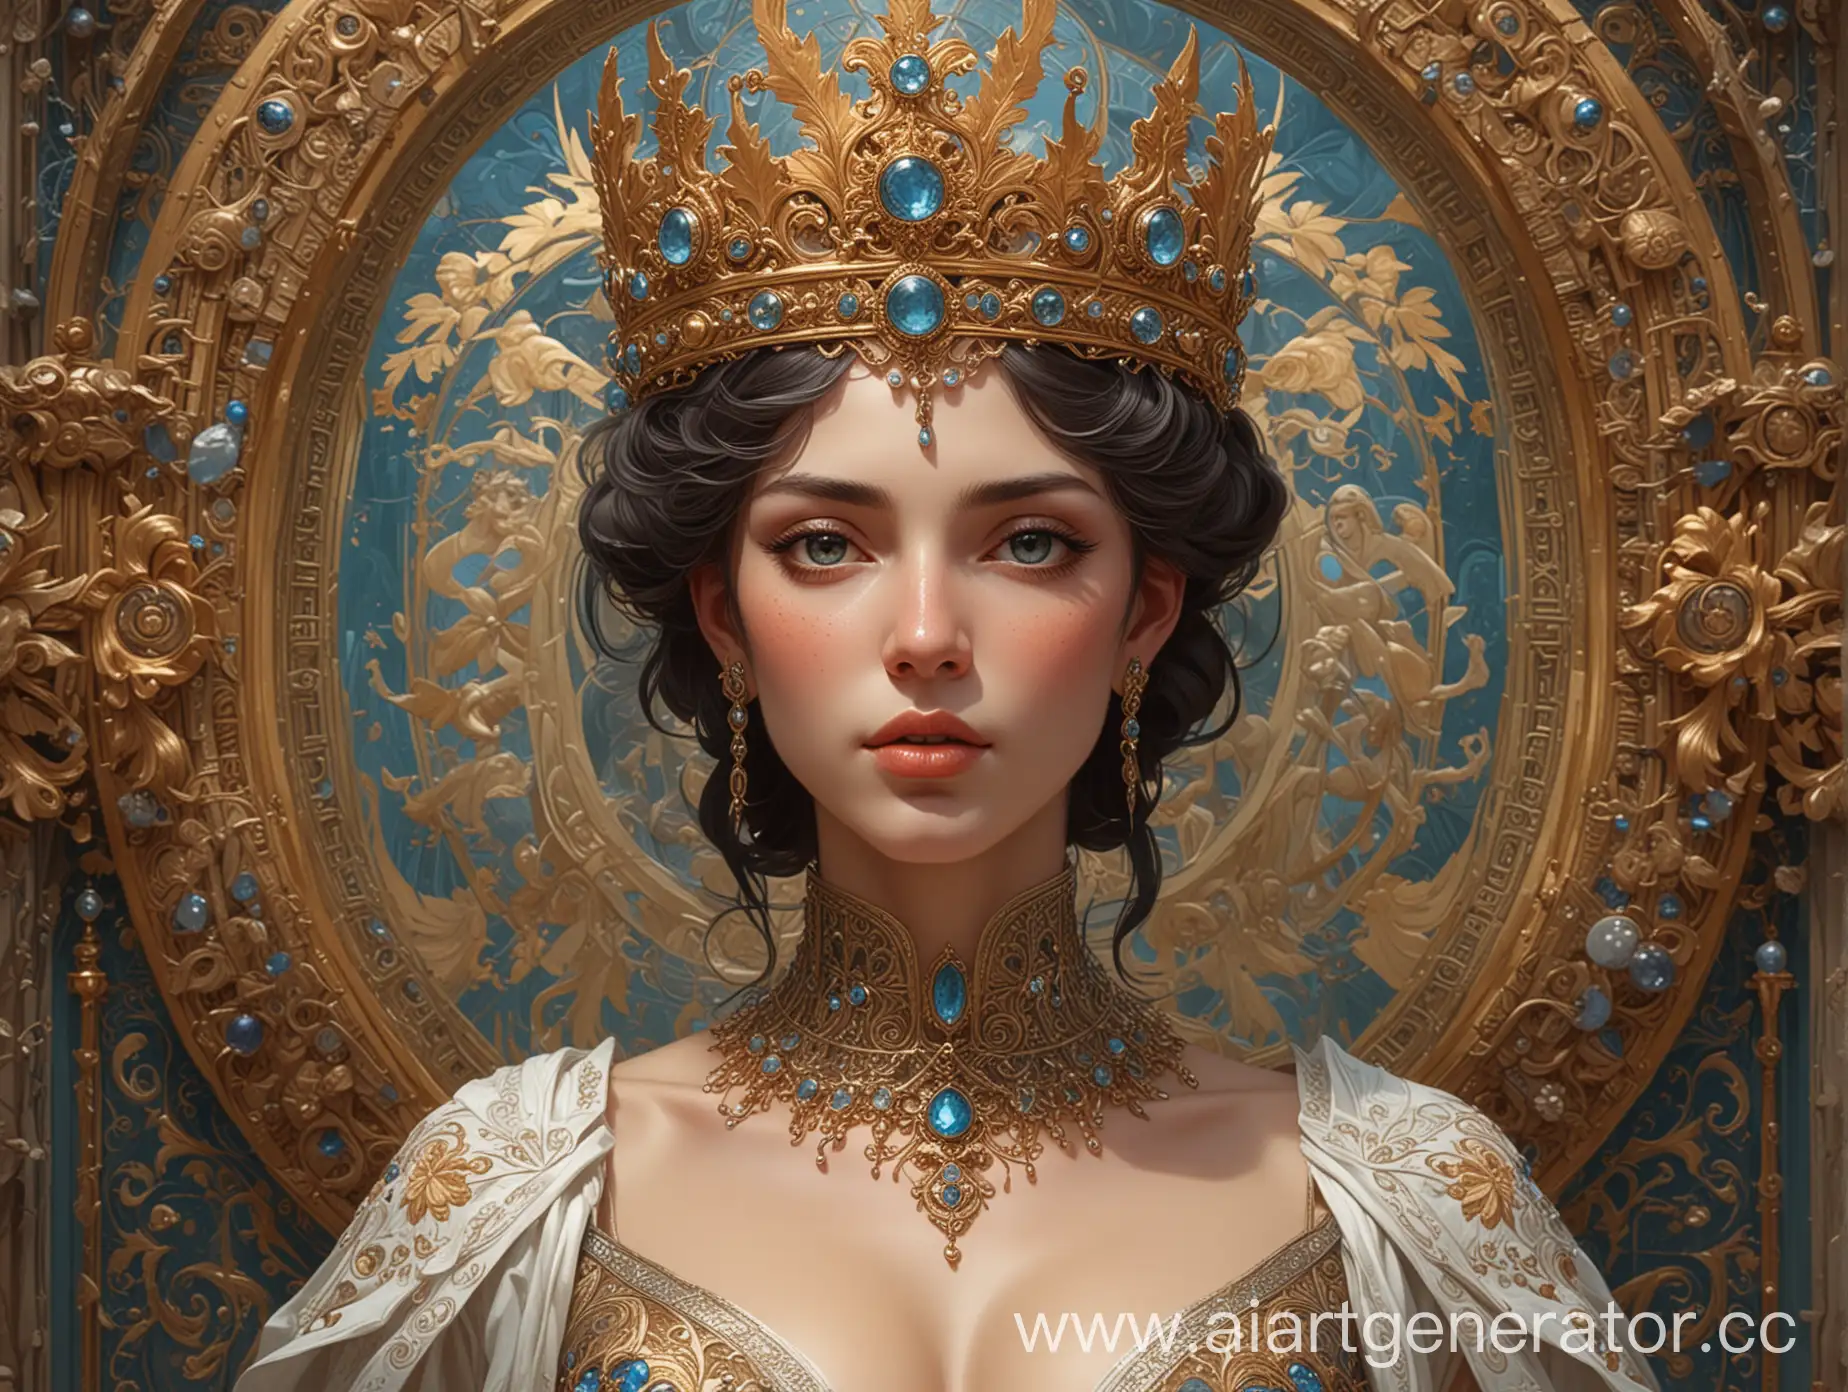 a painting of a woman with a crown on her head, by Galen Dara, fantasy art, intricate ornate anime cgi style, lady dimitrescu, ultra detailed color art, goddess of travel, highly detailed exquisite fanart, alphone mucha, symmetrical epic fantasy art, also known as artemis the selene, avatar image, karol bak uhd, lolth